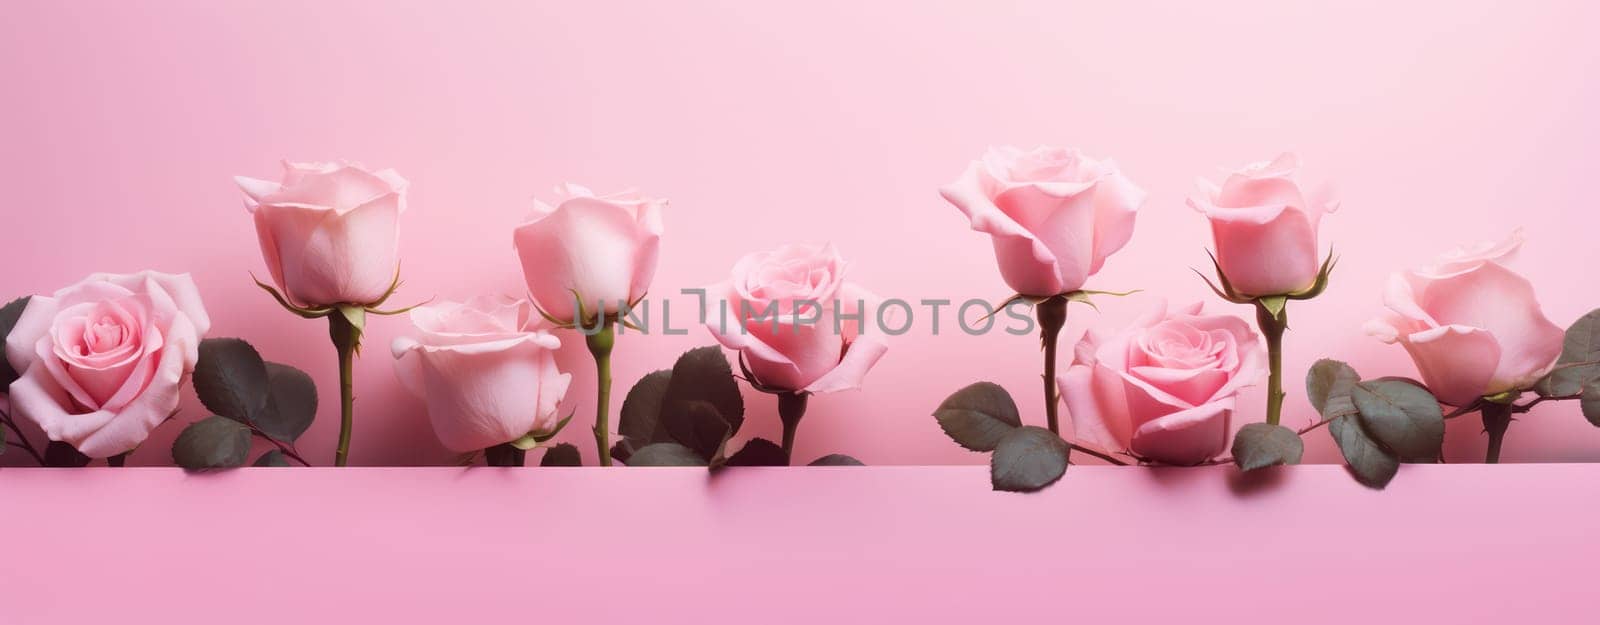 Romantic Blossoming Beauty: A Floral Love Bouquet on a Pink Spring Background by Vichizh